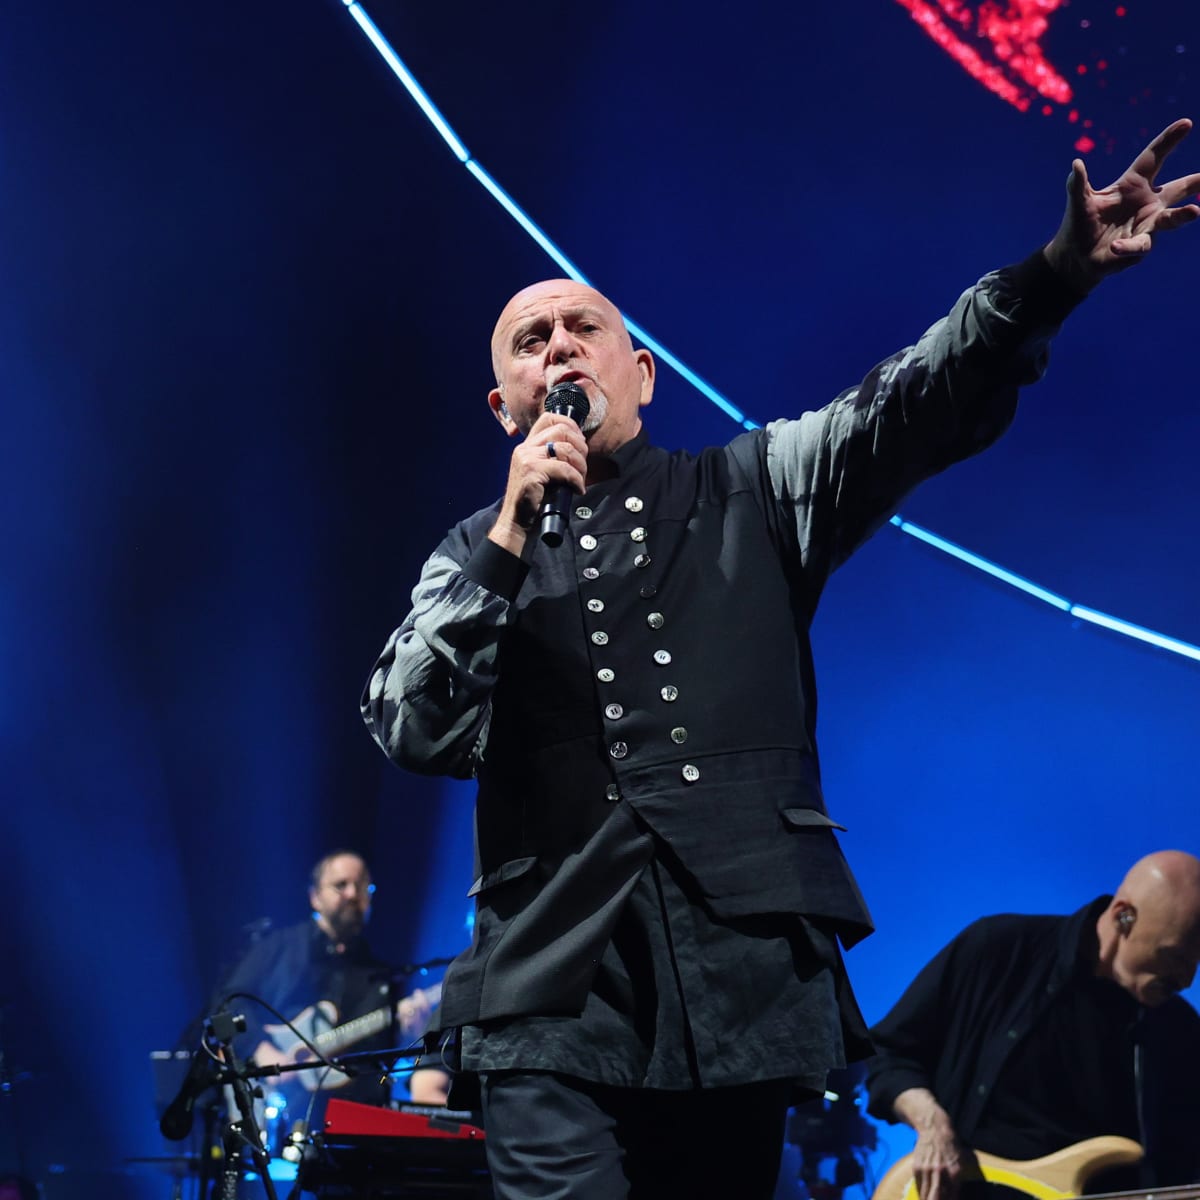 CONCERT REVIEW : Peter Gabriel Rocks the Hydro with I/O Tour - A